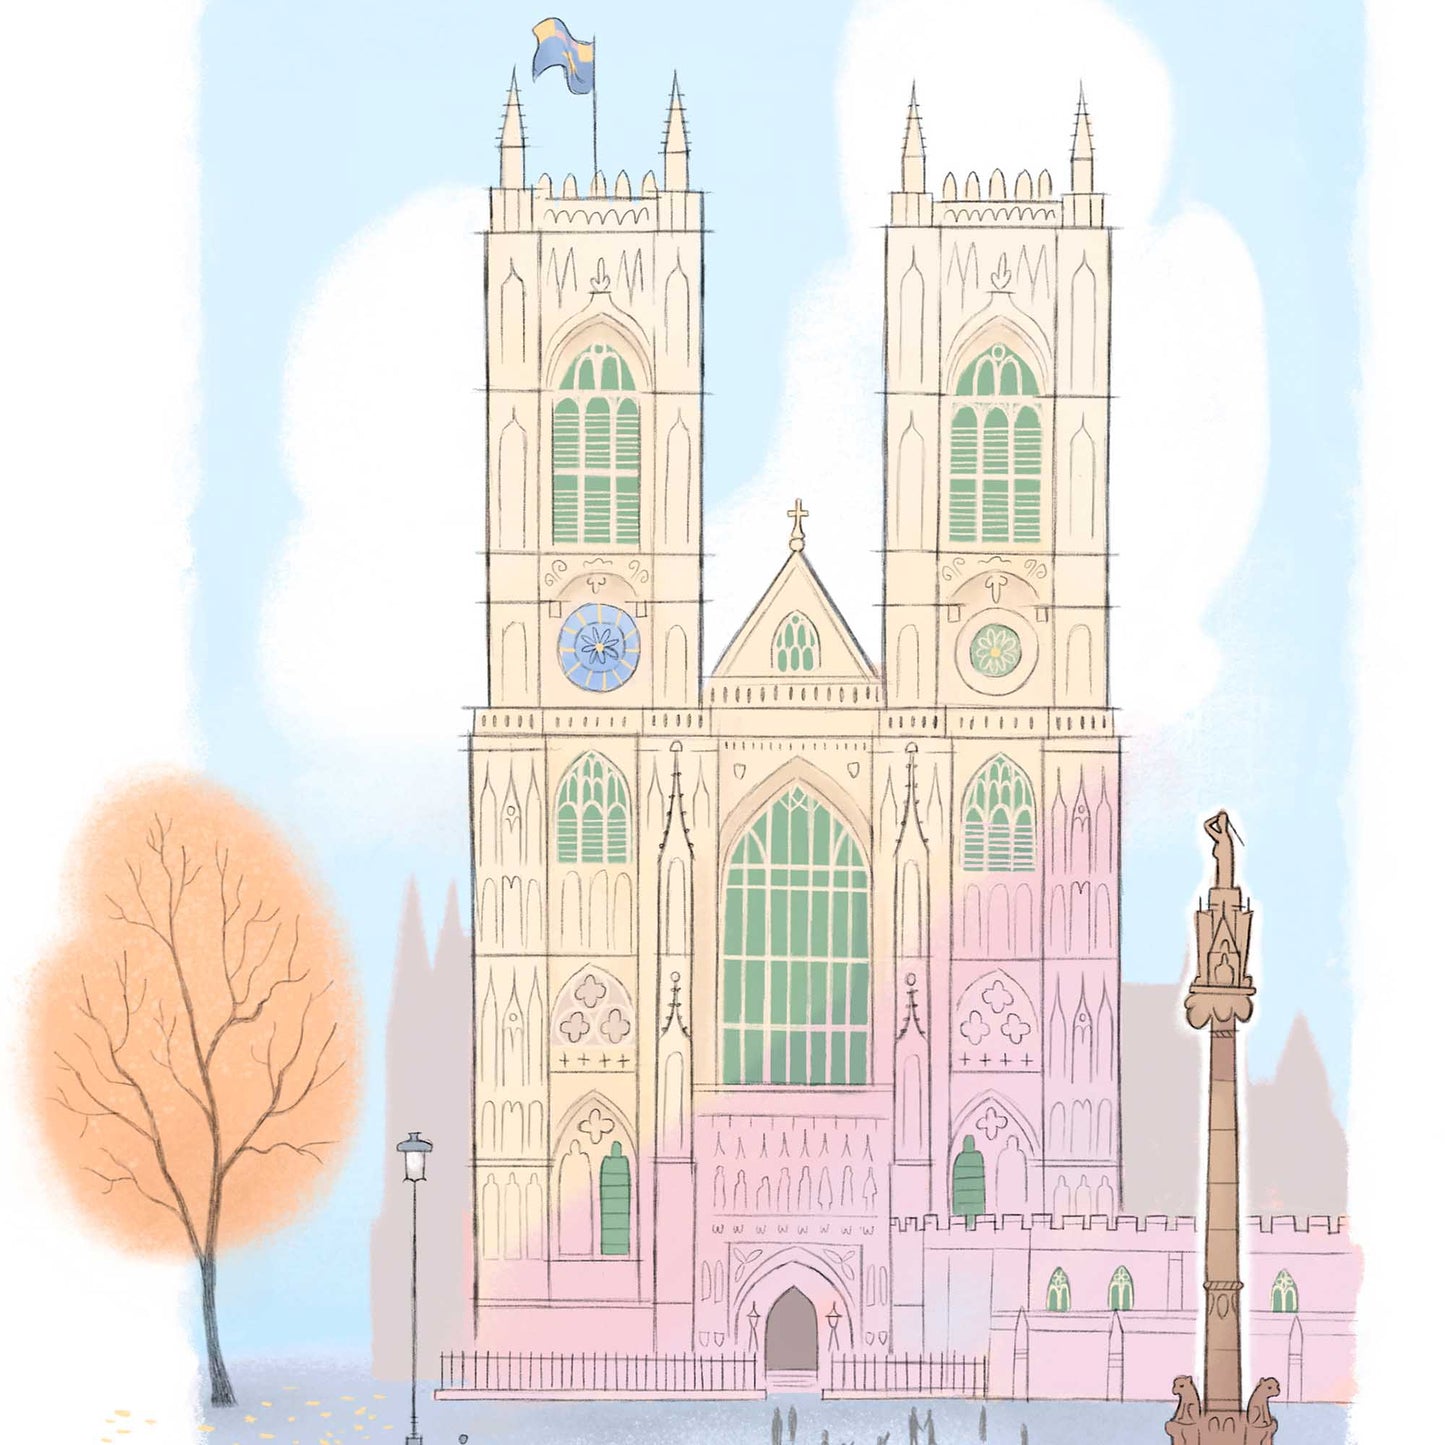 Detail from a print of London's Westminster Abbey beautifully illustrated by Mike Green.